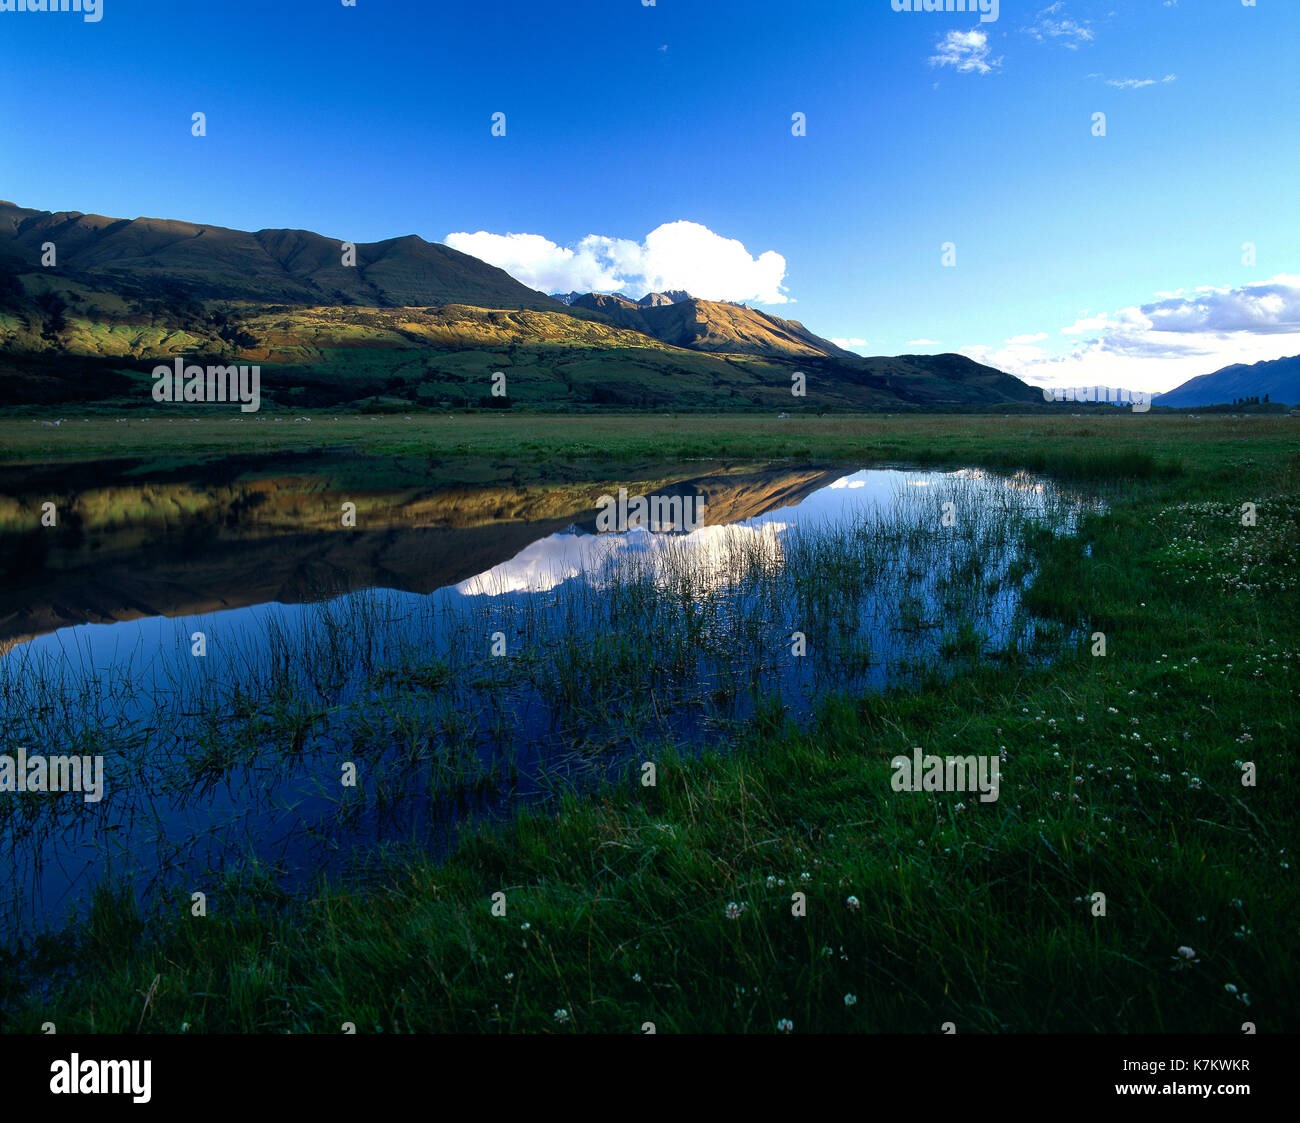 New Zealand. Queenstown Region. Hills reflected in valley lake in late evening shadows. Stock Photo